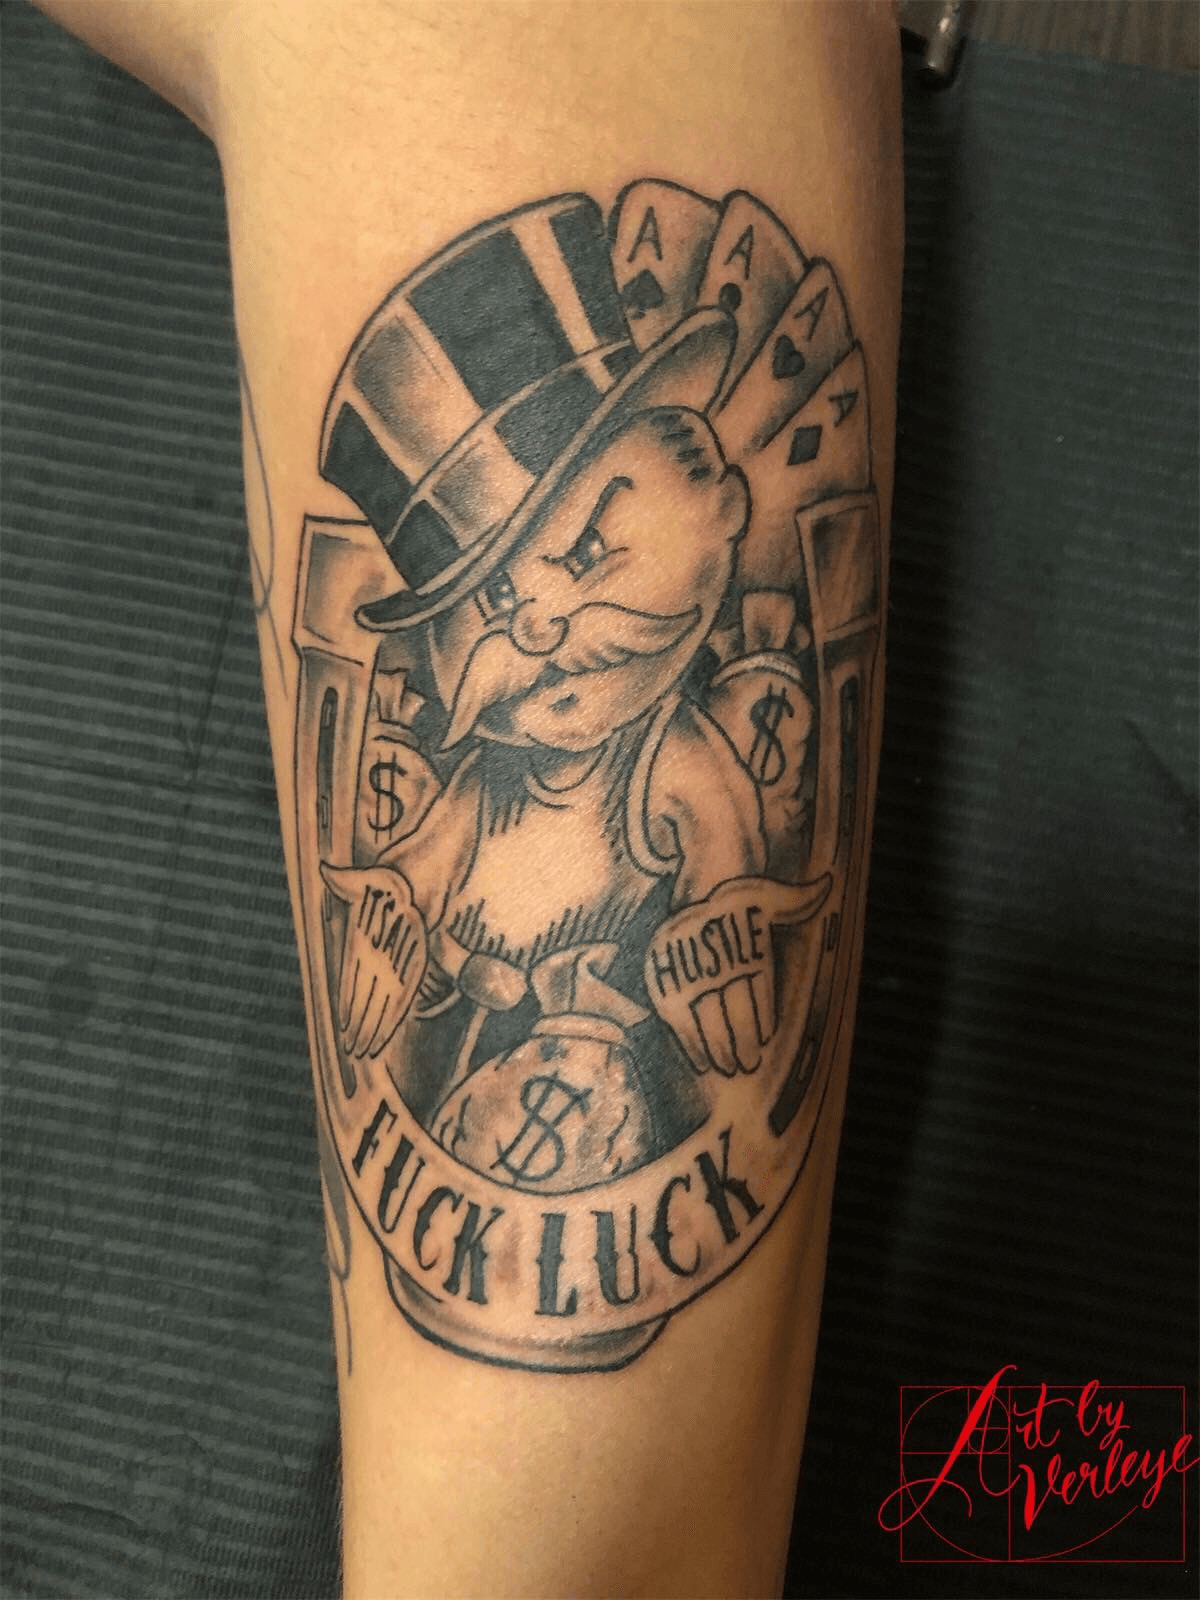 Got this tattoo of Rich uncle Pennybags Thought some of you might like it    rmonopoly